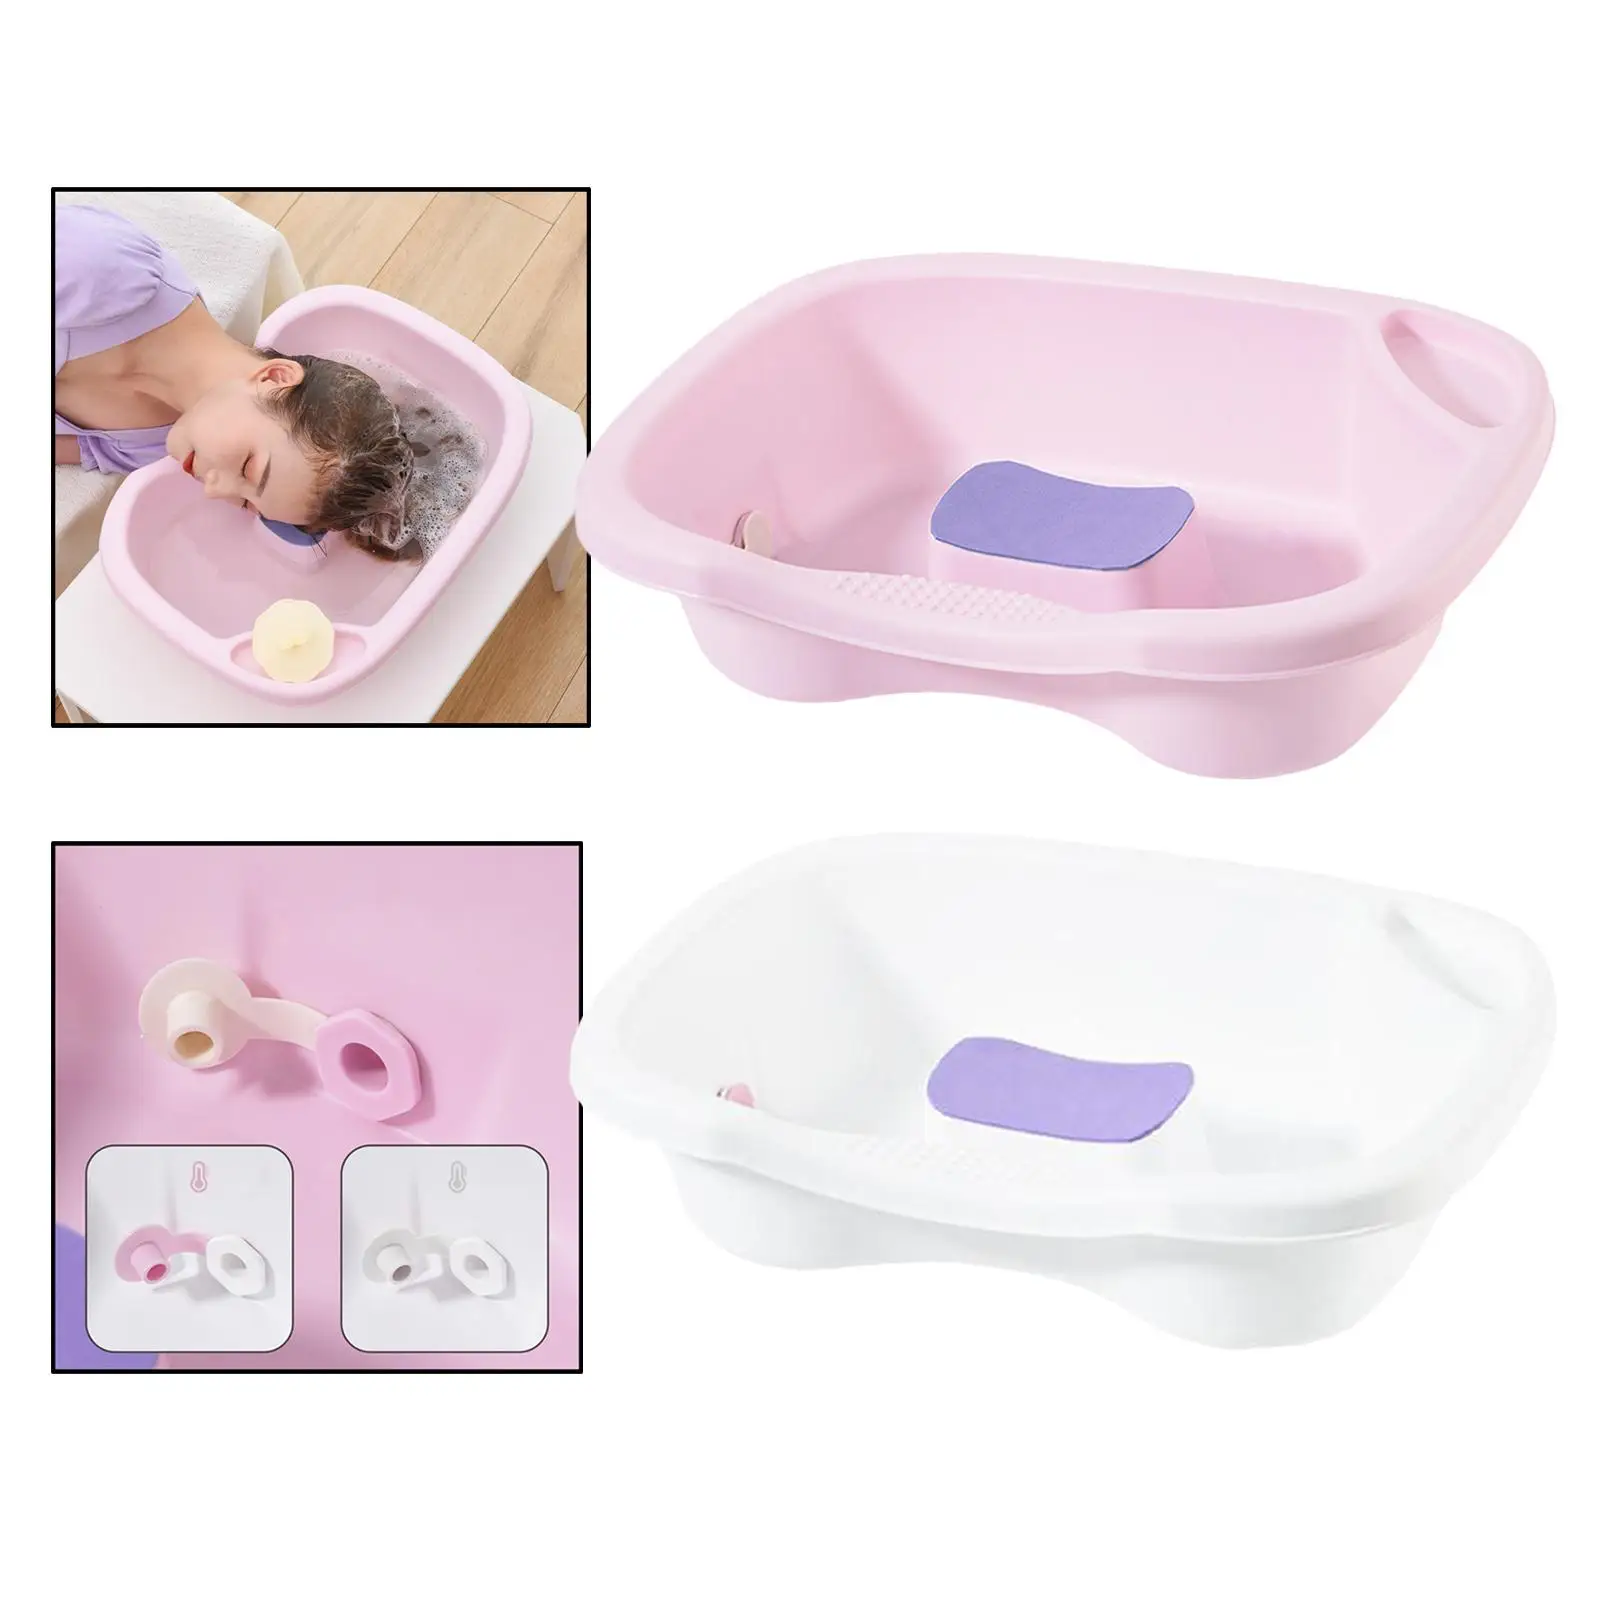 Hair Washing Basin with Tube Bathing Aid Stable Hair Washing Sink for Hair Washing Barber Shop Home Salon Hairdresser Patient